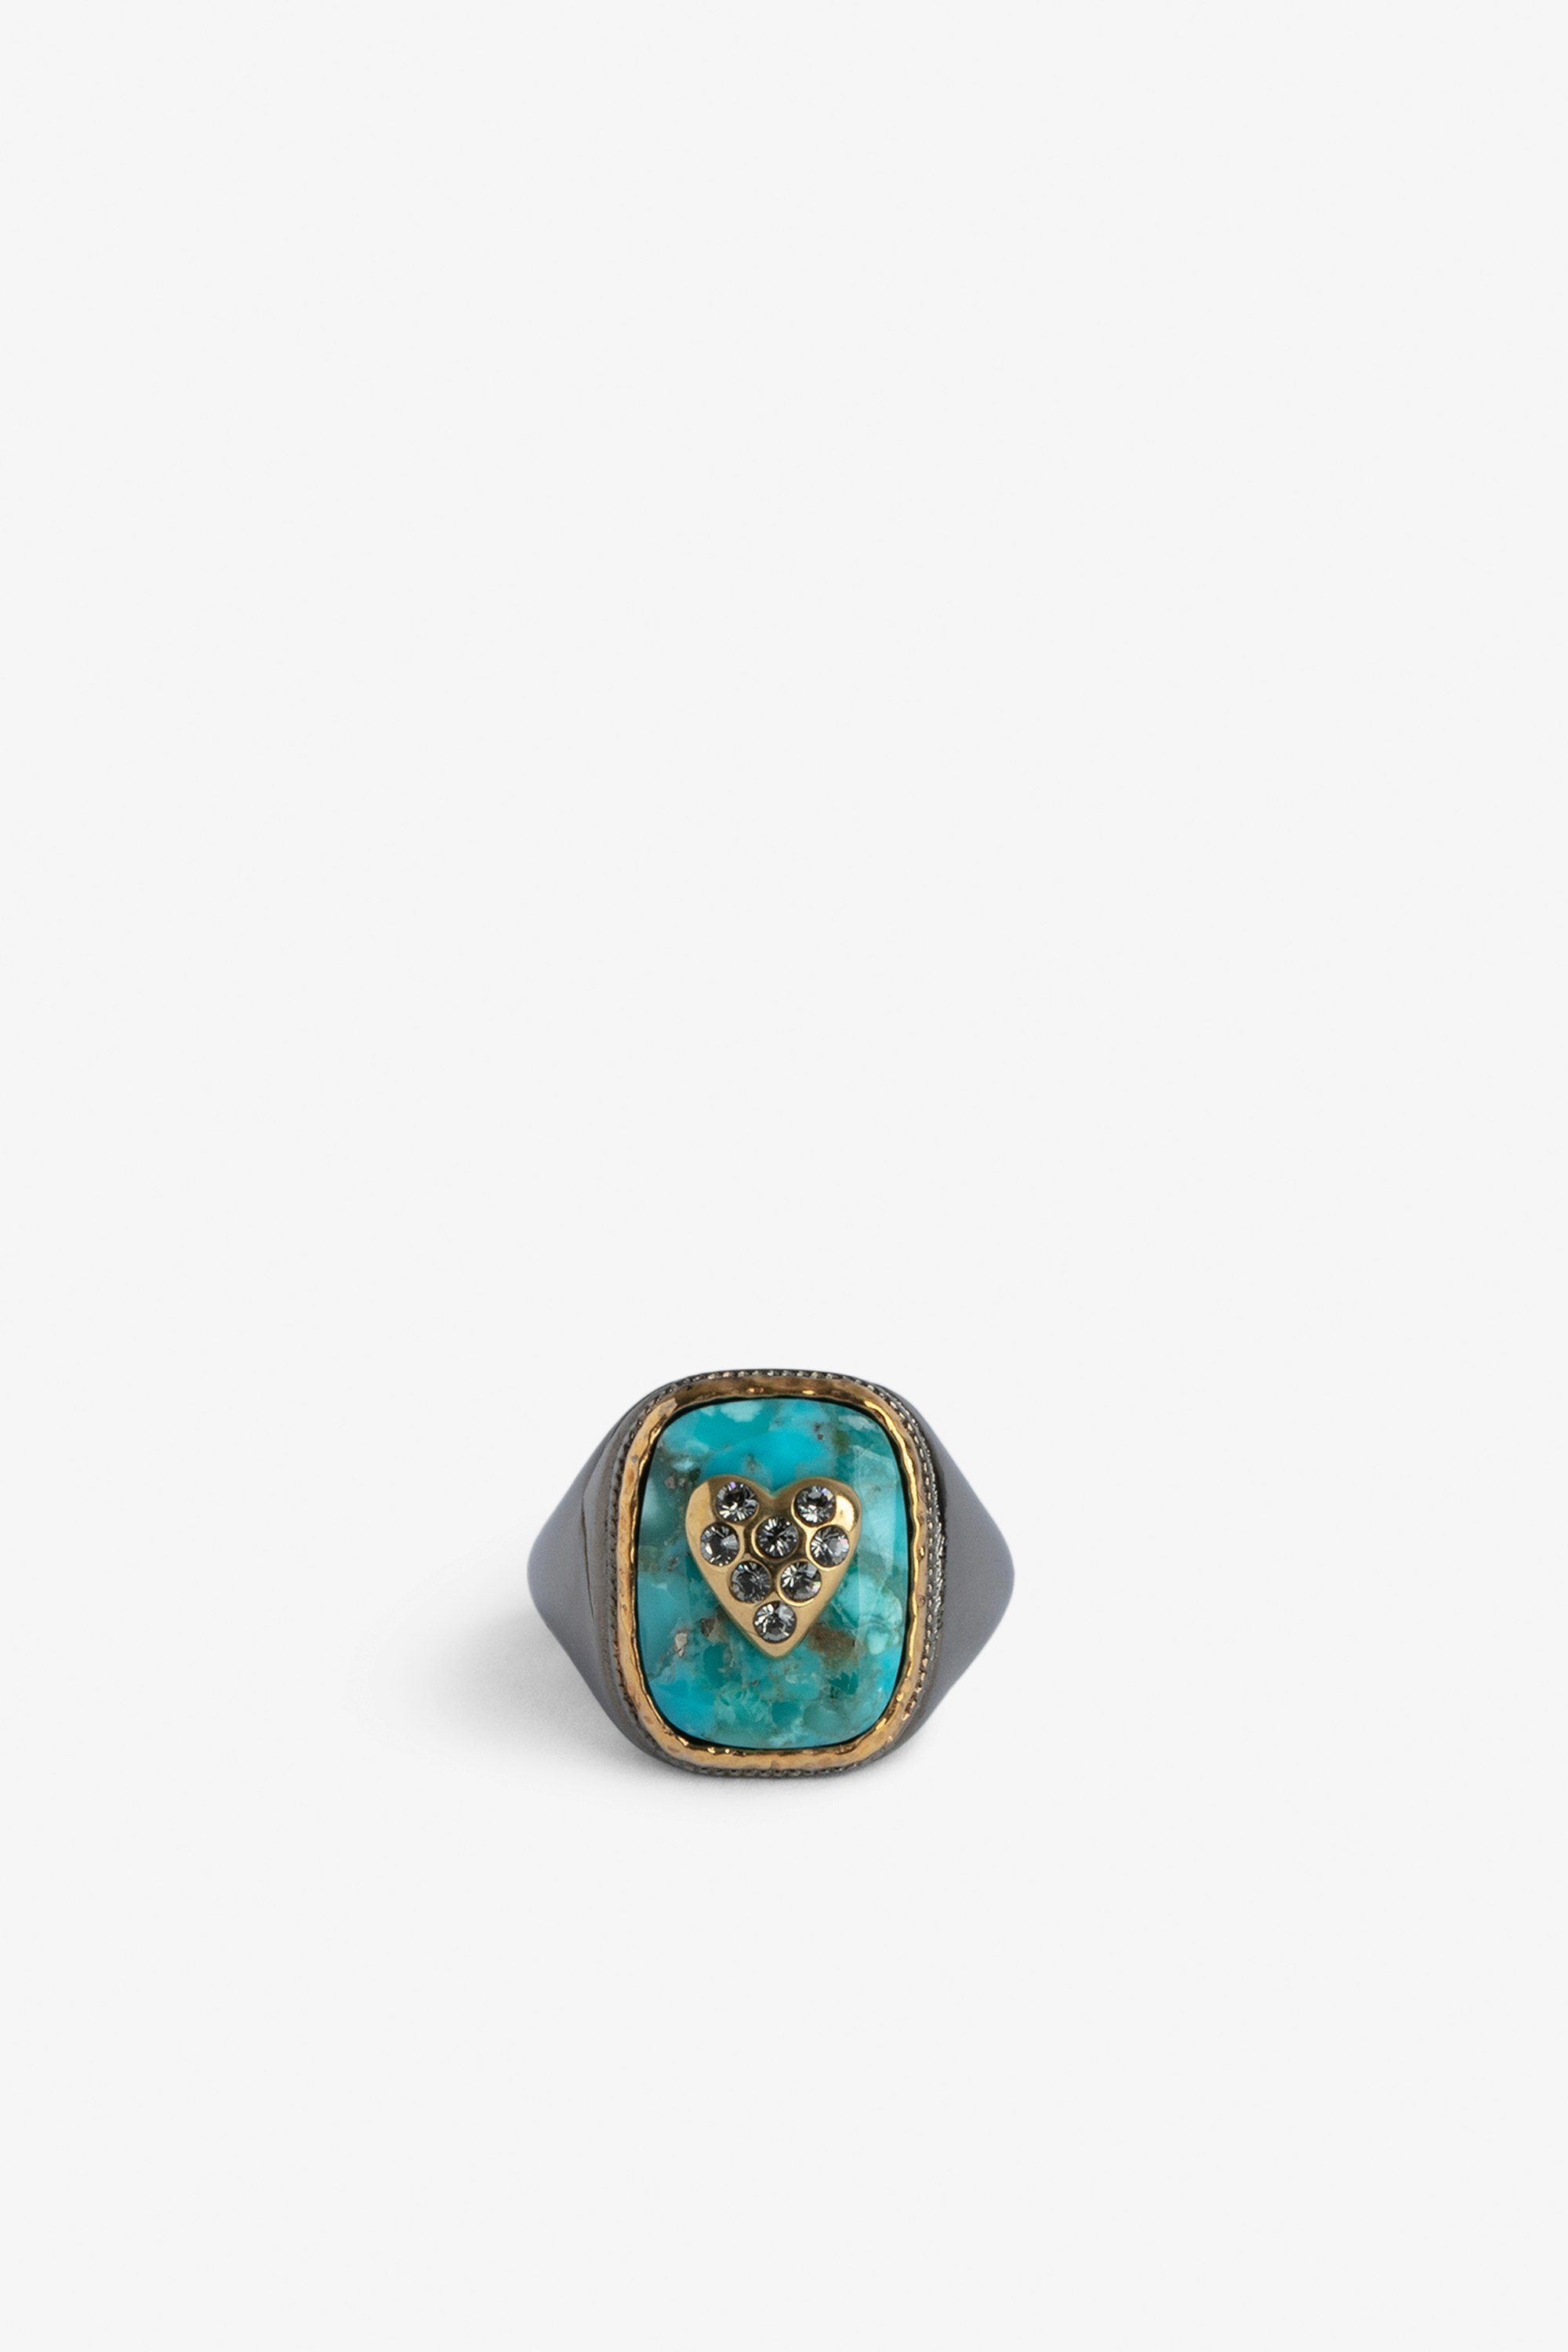 Heart Signet Ring - Blue and gold-tone signet ring set with a gold-tone brass heart.